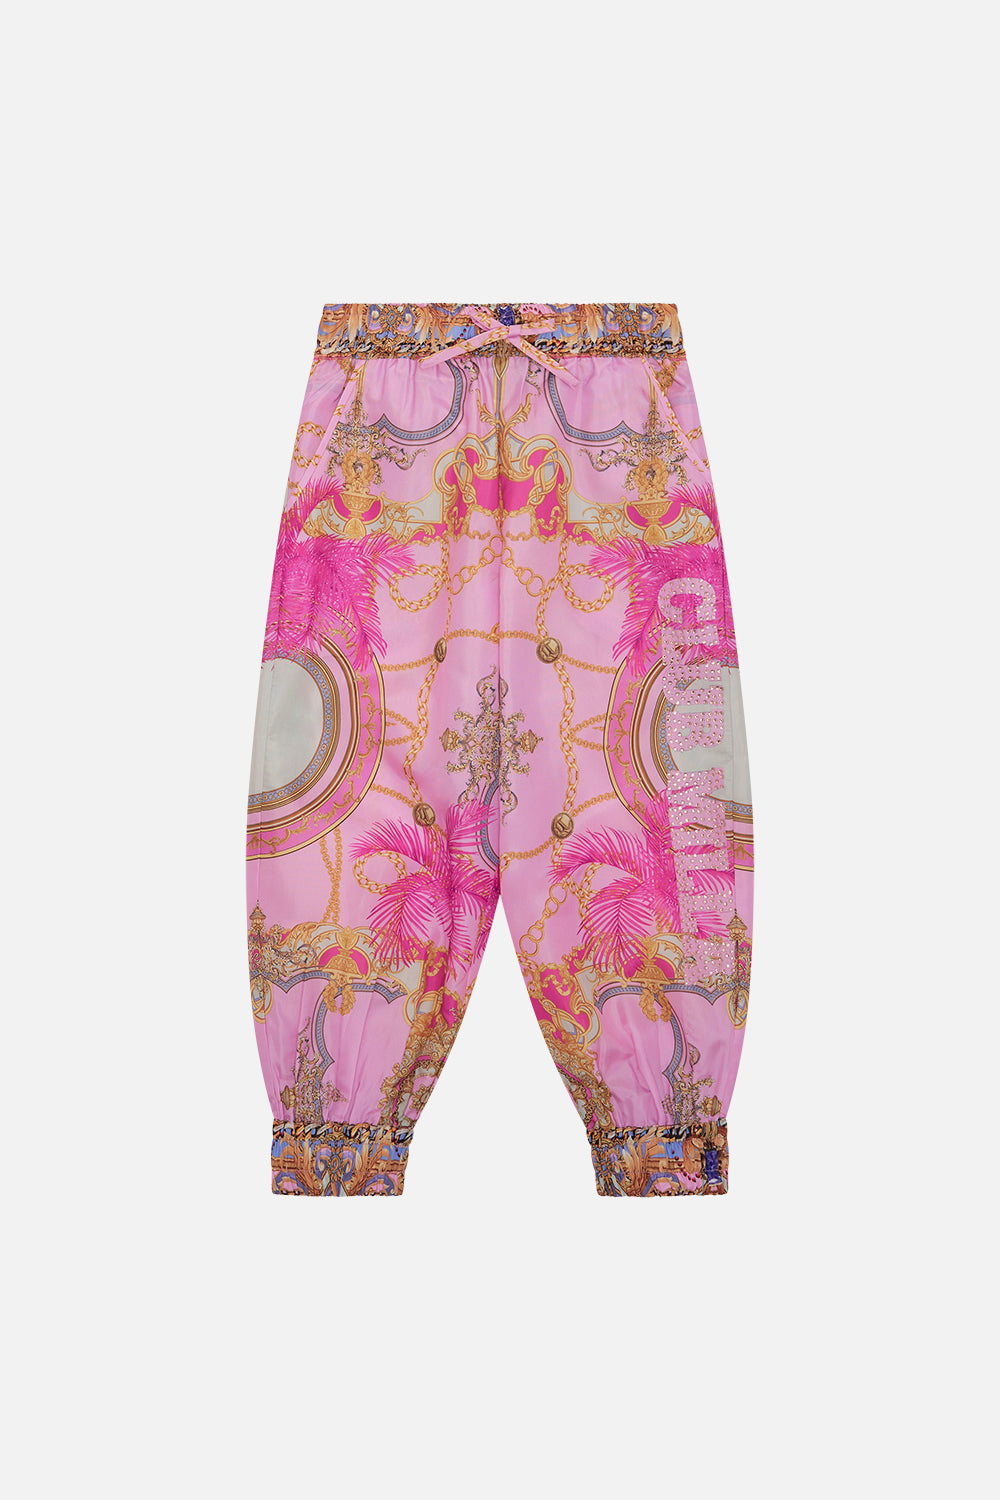 Product view of MILLA By CAMILLA kids printed track pants in Tiptoe The Tightrope print